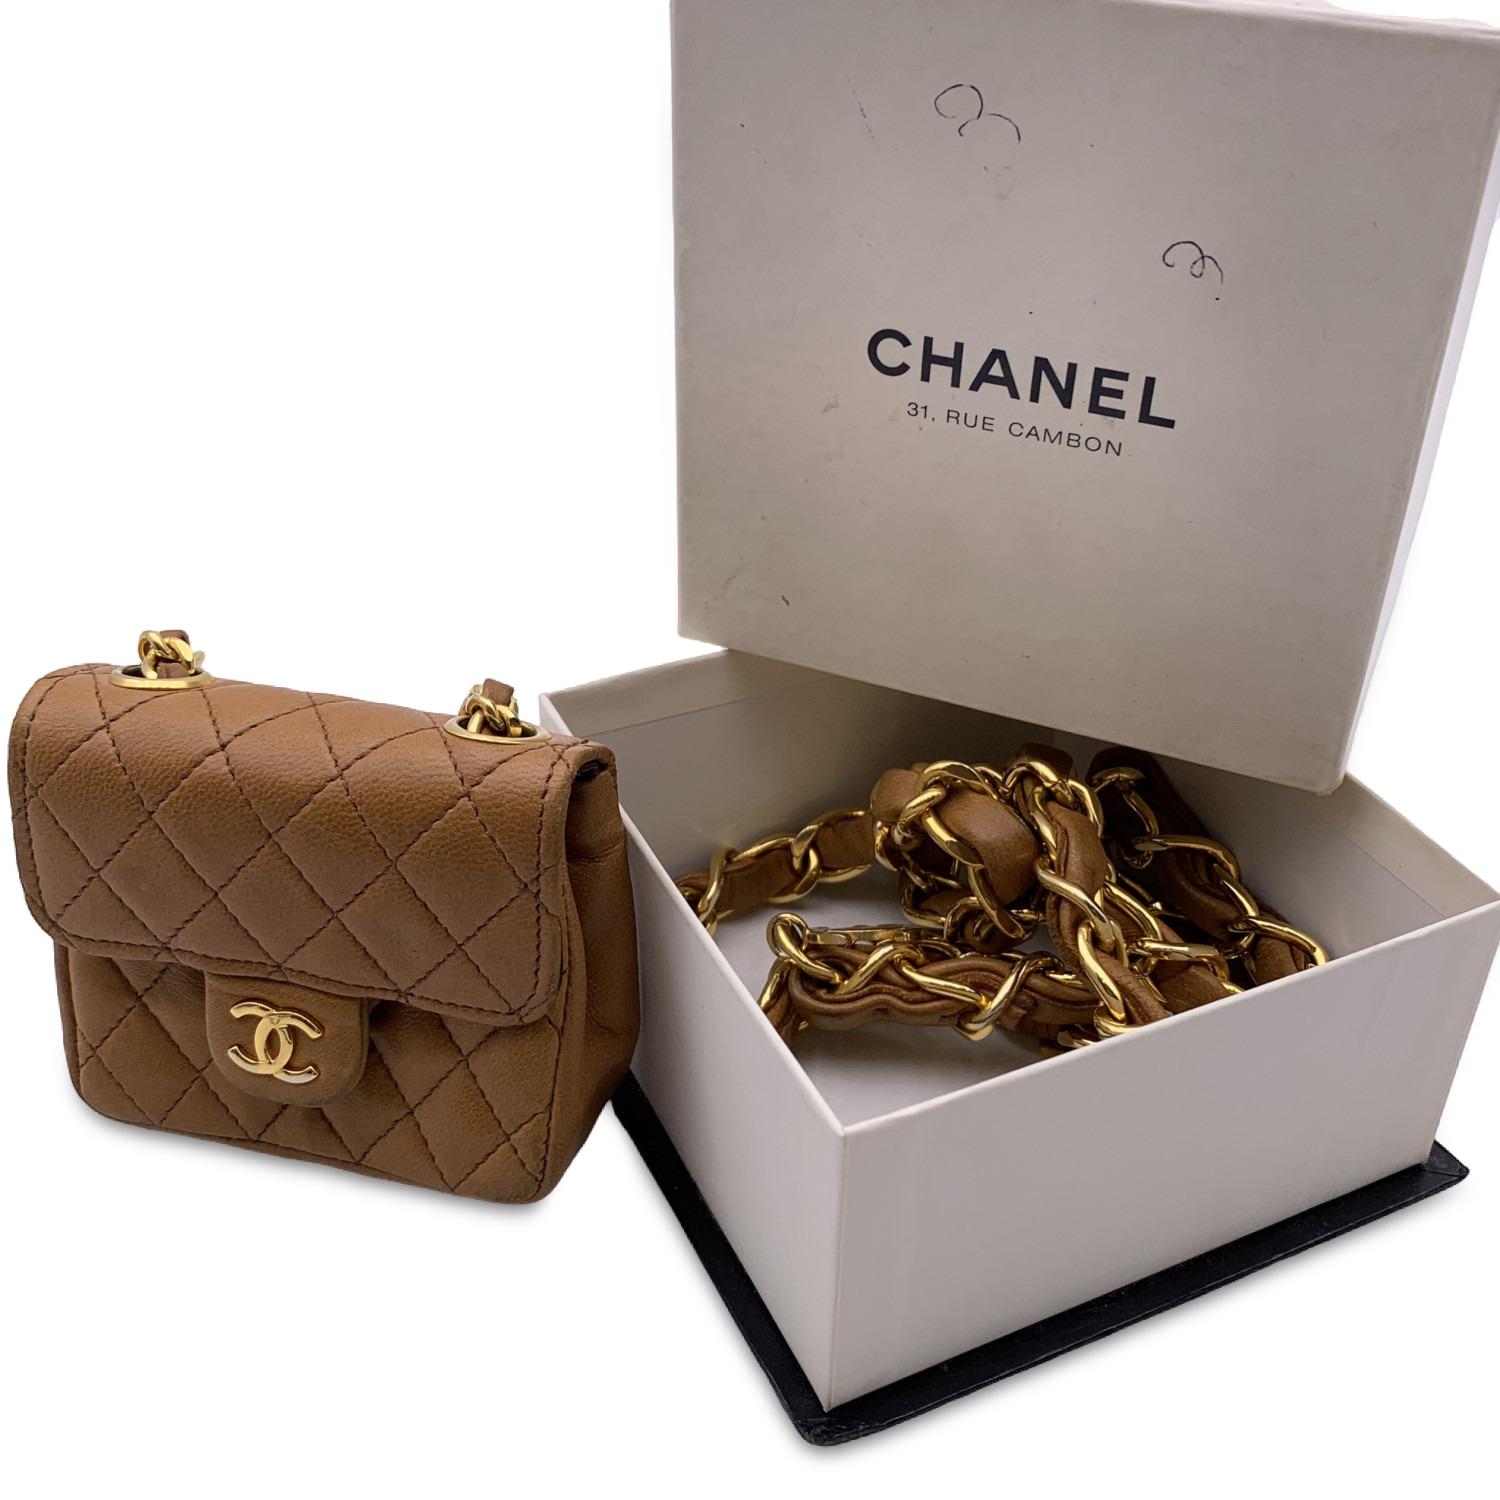 This beautiful Bag will come with a Certificate of Authenticity provided by Entrupy. The certificate will be provided at no further cost.

Classic vintage Chanel gold metal chain belt with classic flap micro bag . Gold metal chain belt with